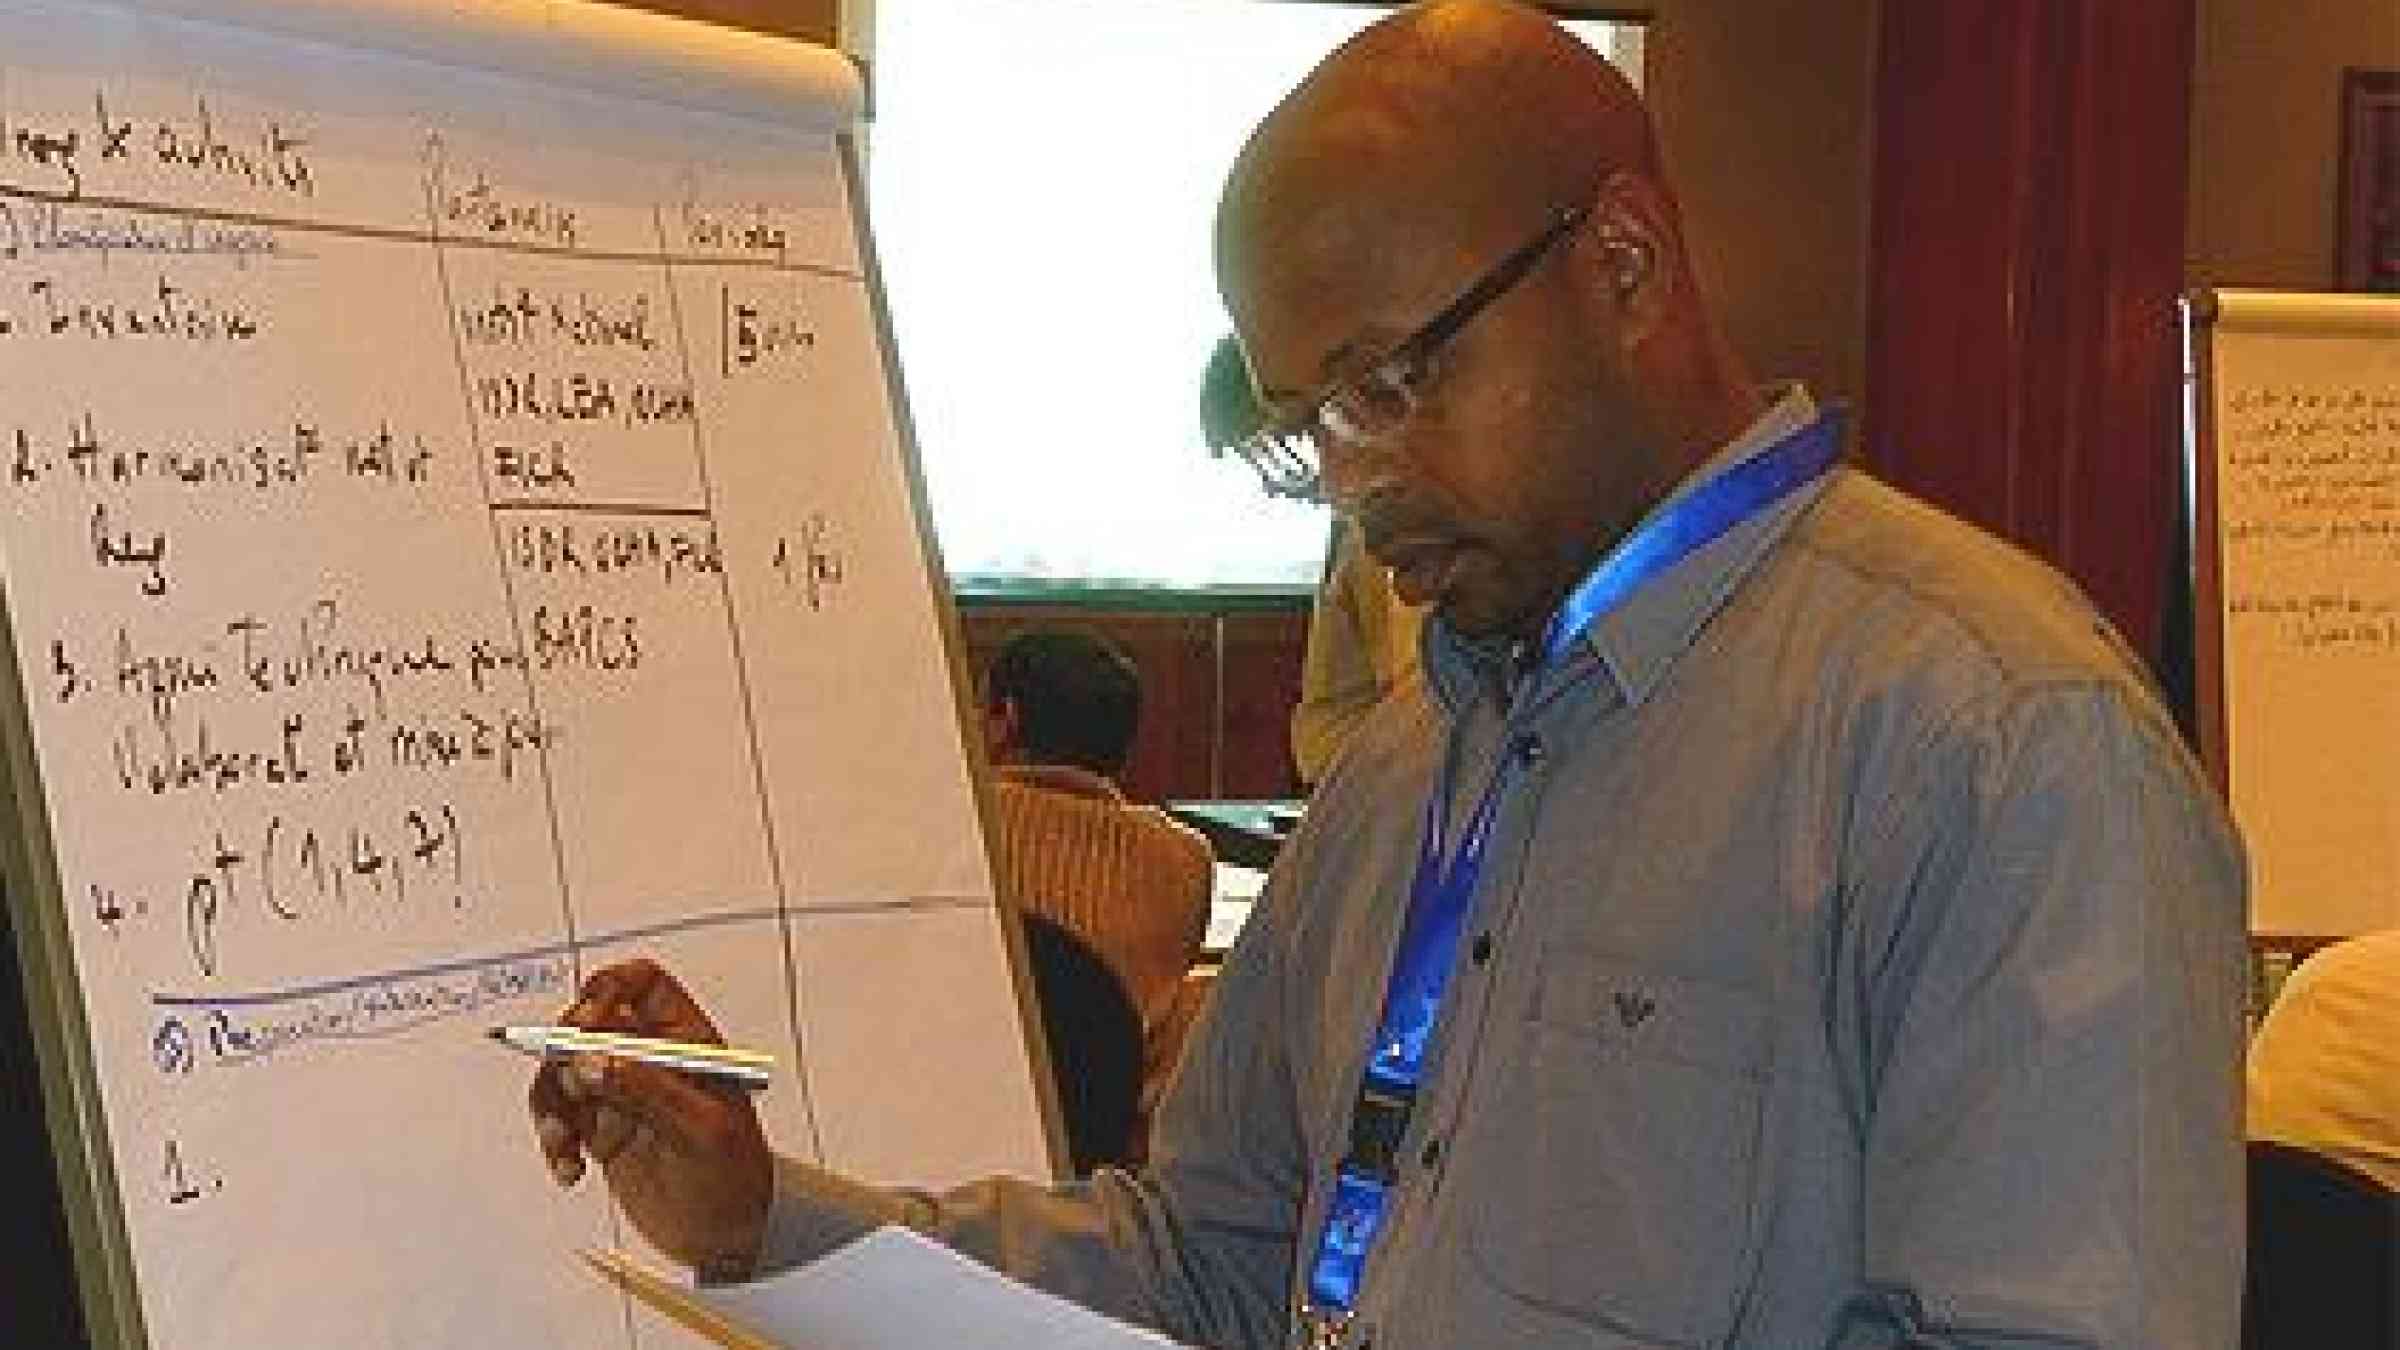 Hamidi Soule of the Comoros, one of the participants of the Regional Meeting to Advance Disaster Risk Reduction held in Cairo, Egypt in April 2012